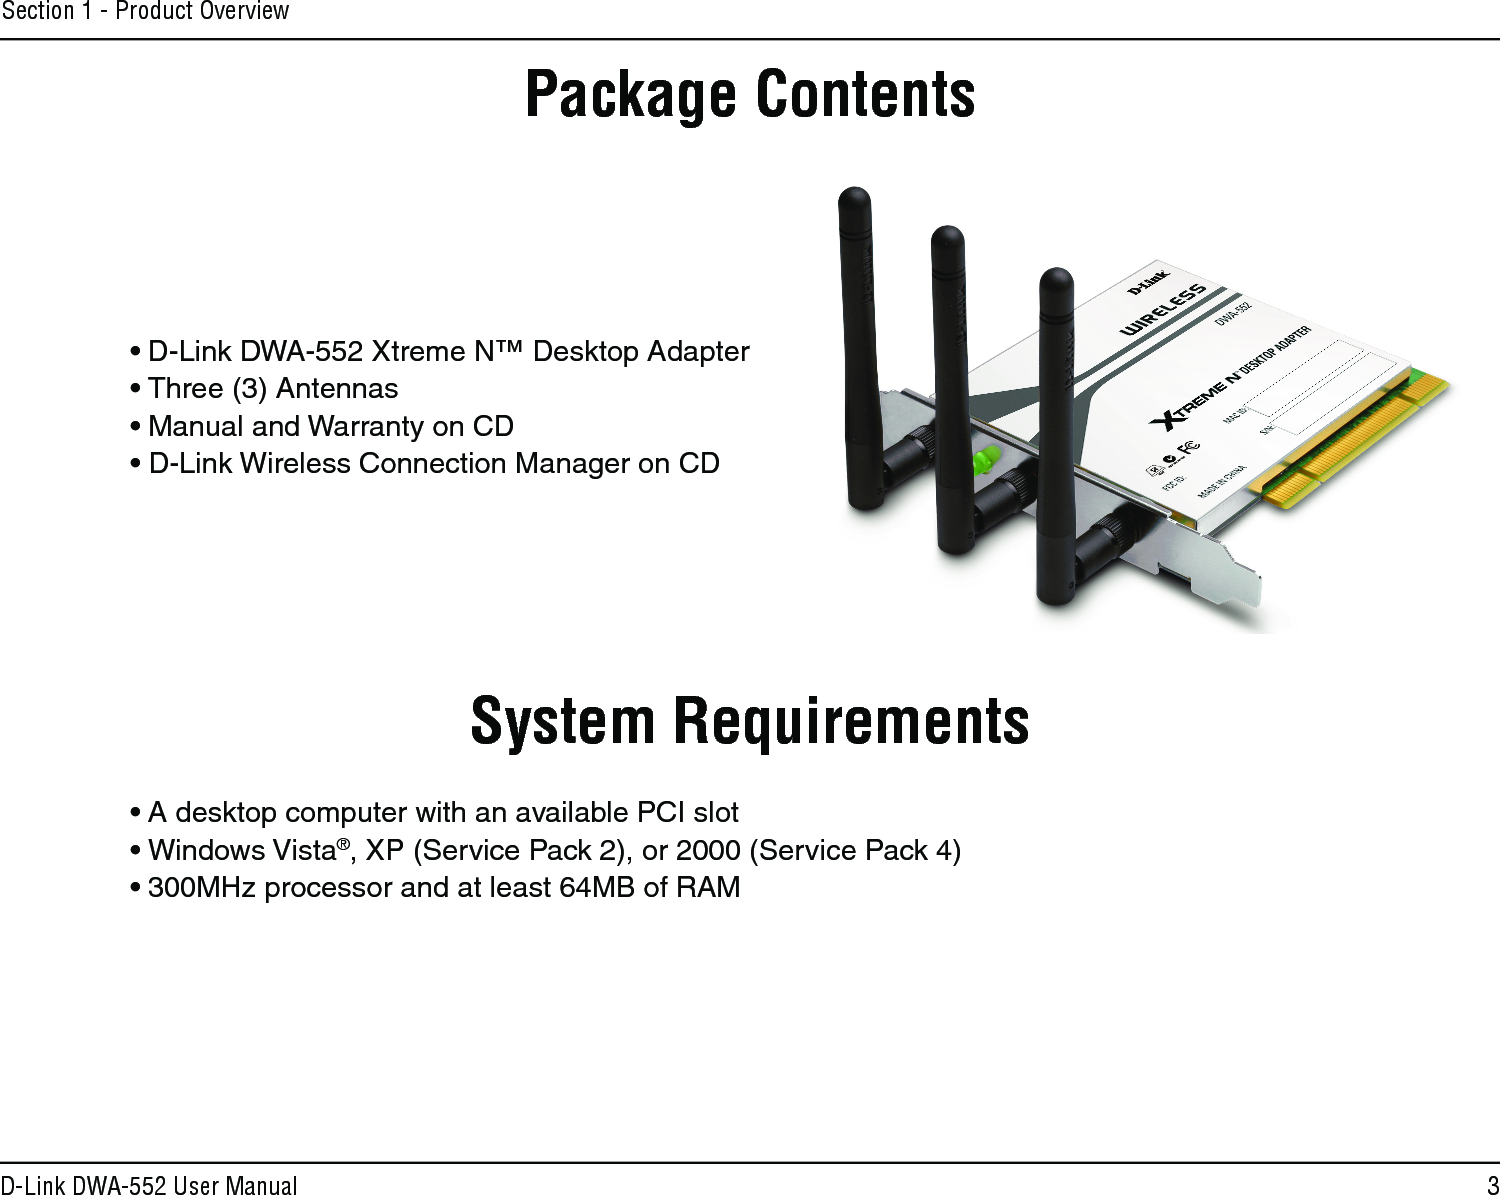 3D-Link DWA-552 User ManualSection 1 - Product Overview• D-Link DWA-552 Xtreme N™ Desktop Adapter• Three (3) Antennas• Manual and Warranty on CD• D-Link Wireless Connection Manager on CDSystem Requirements• A desktop computer with an available PCI slot• Windows Vista®, XP (Service Pack 2), or 2000 (Service Pack 4)• 300MHz processor and at least 64MB of RAMProduct OverviewPackage Contents